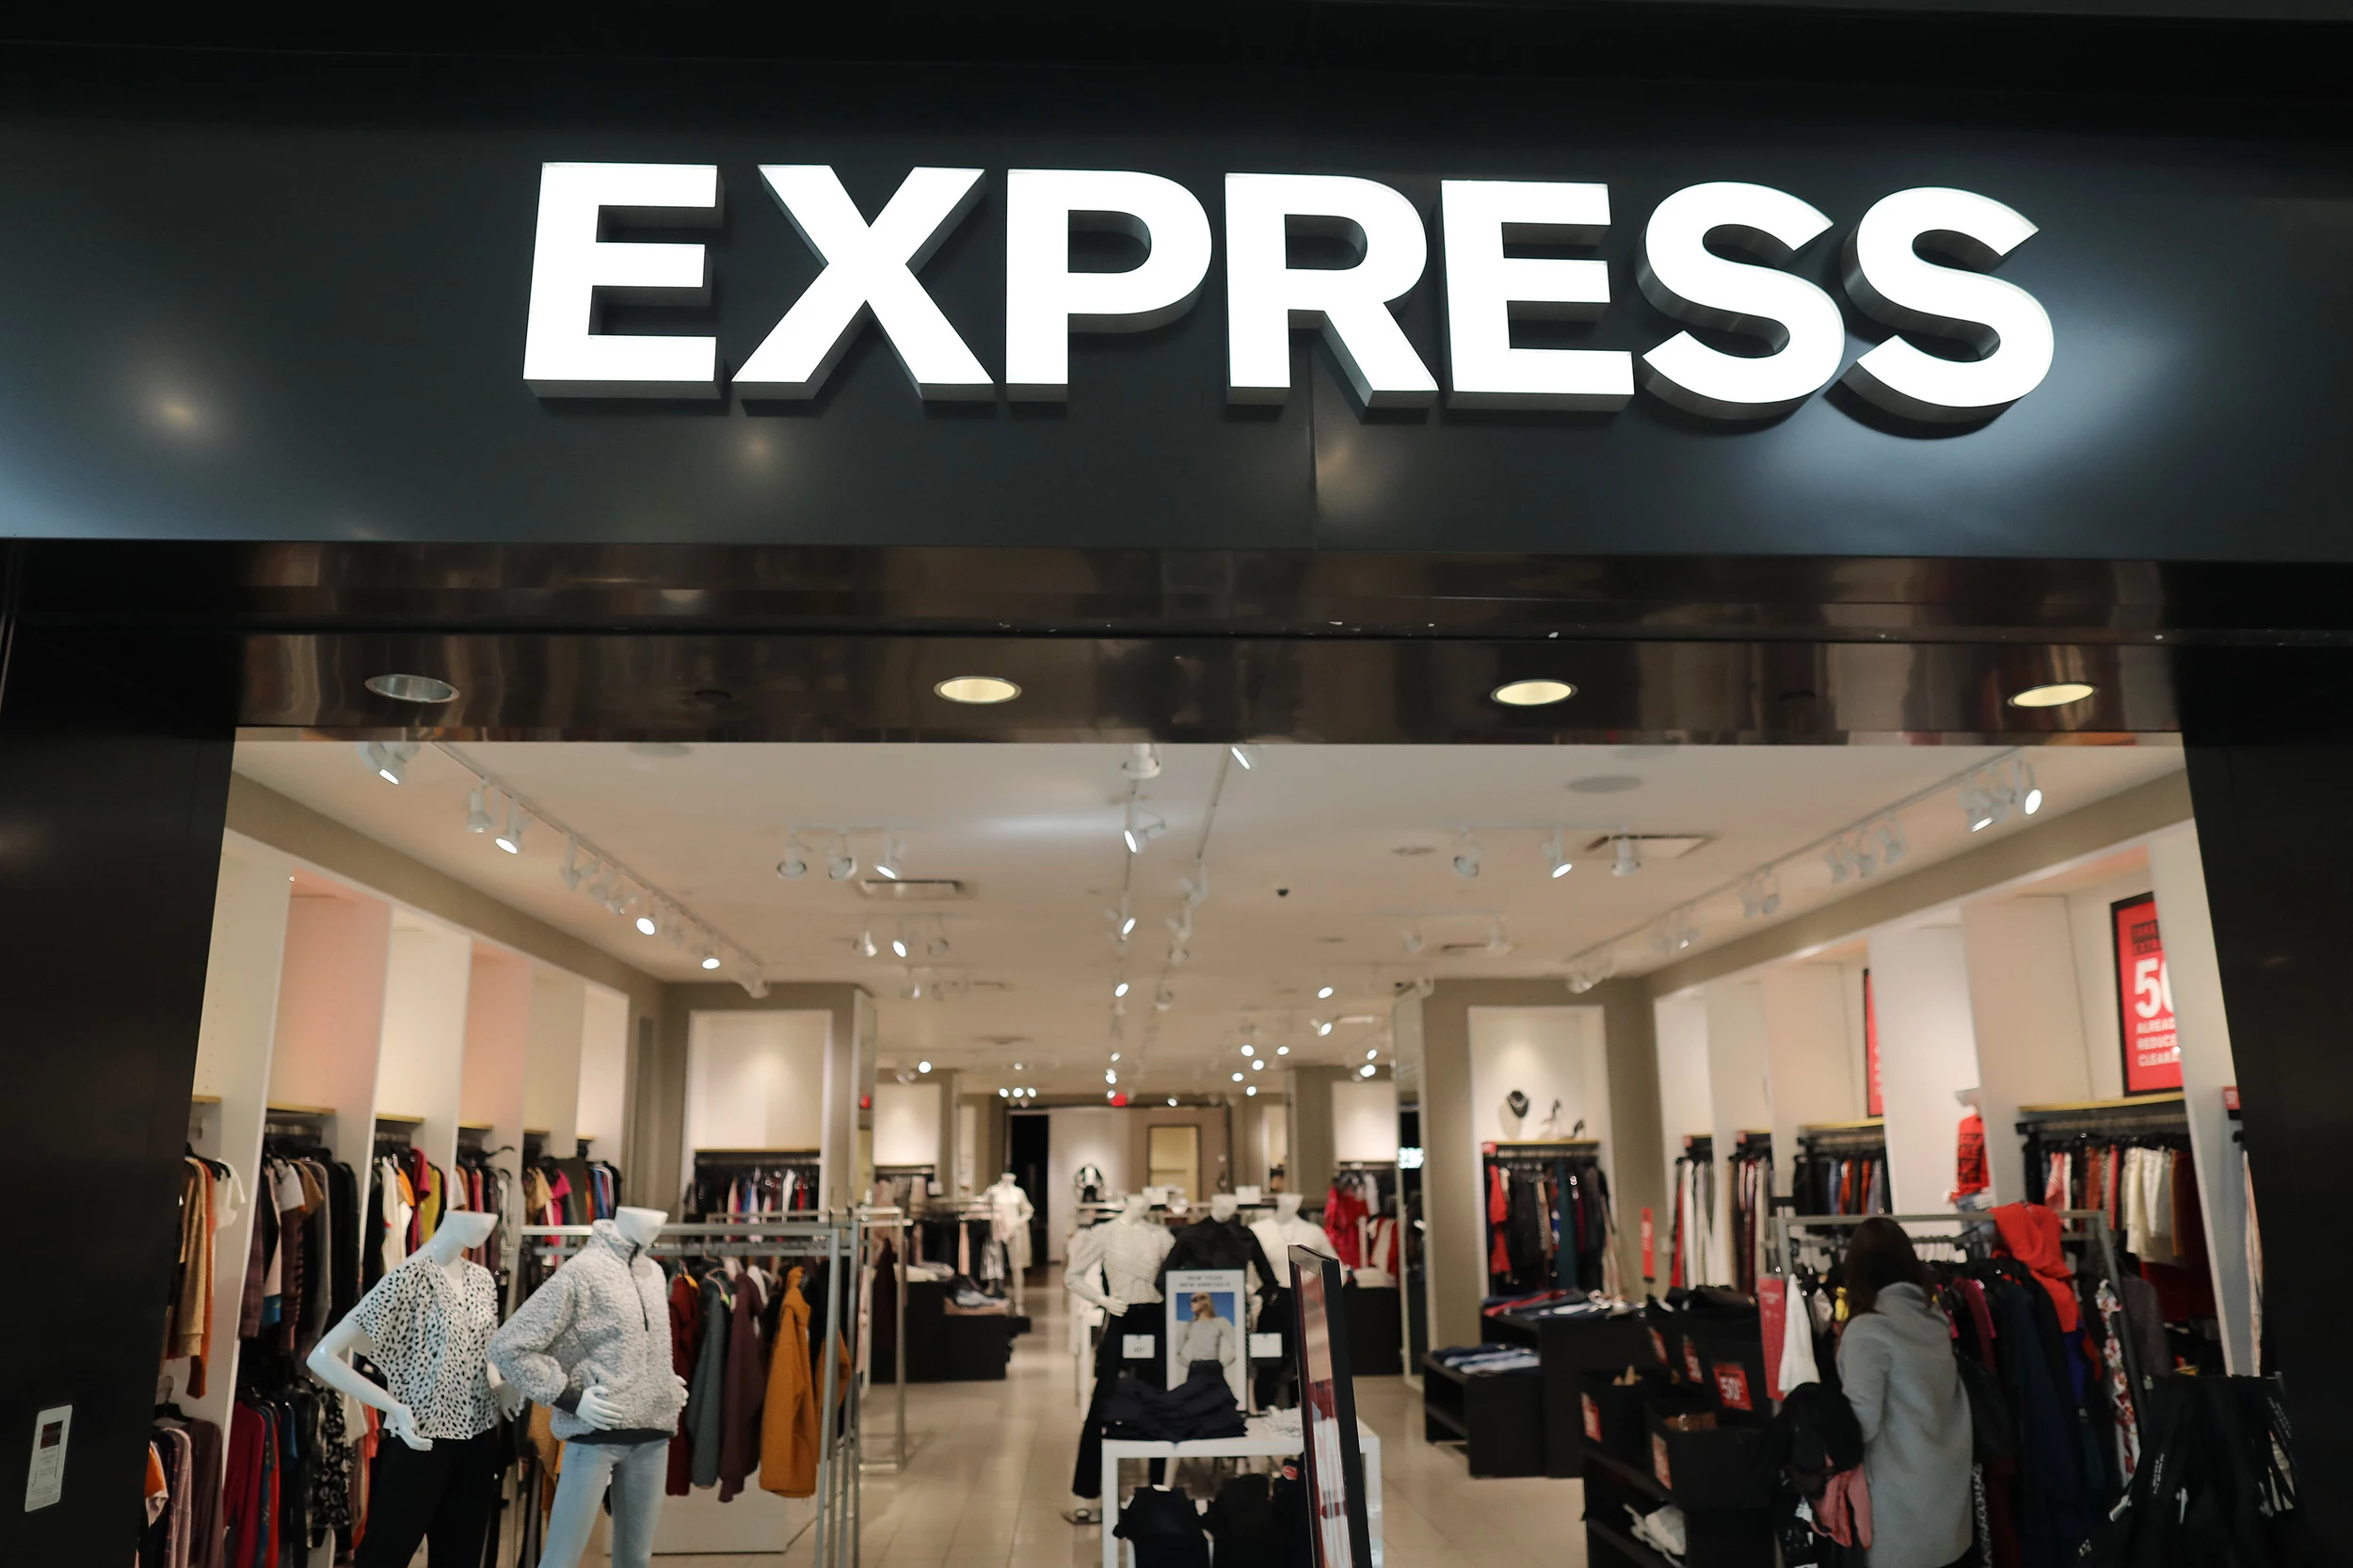 Express Clothing Chain To Close Approximately 100 Stores By 2022